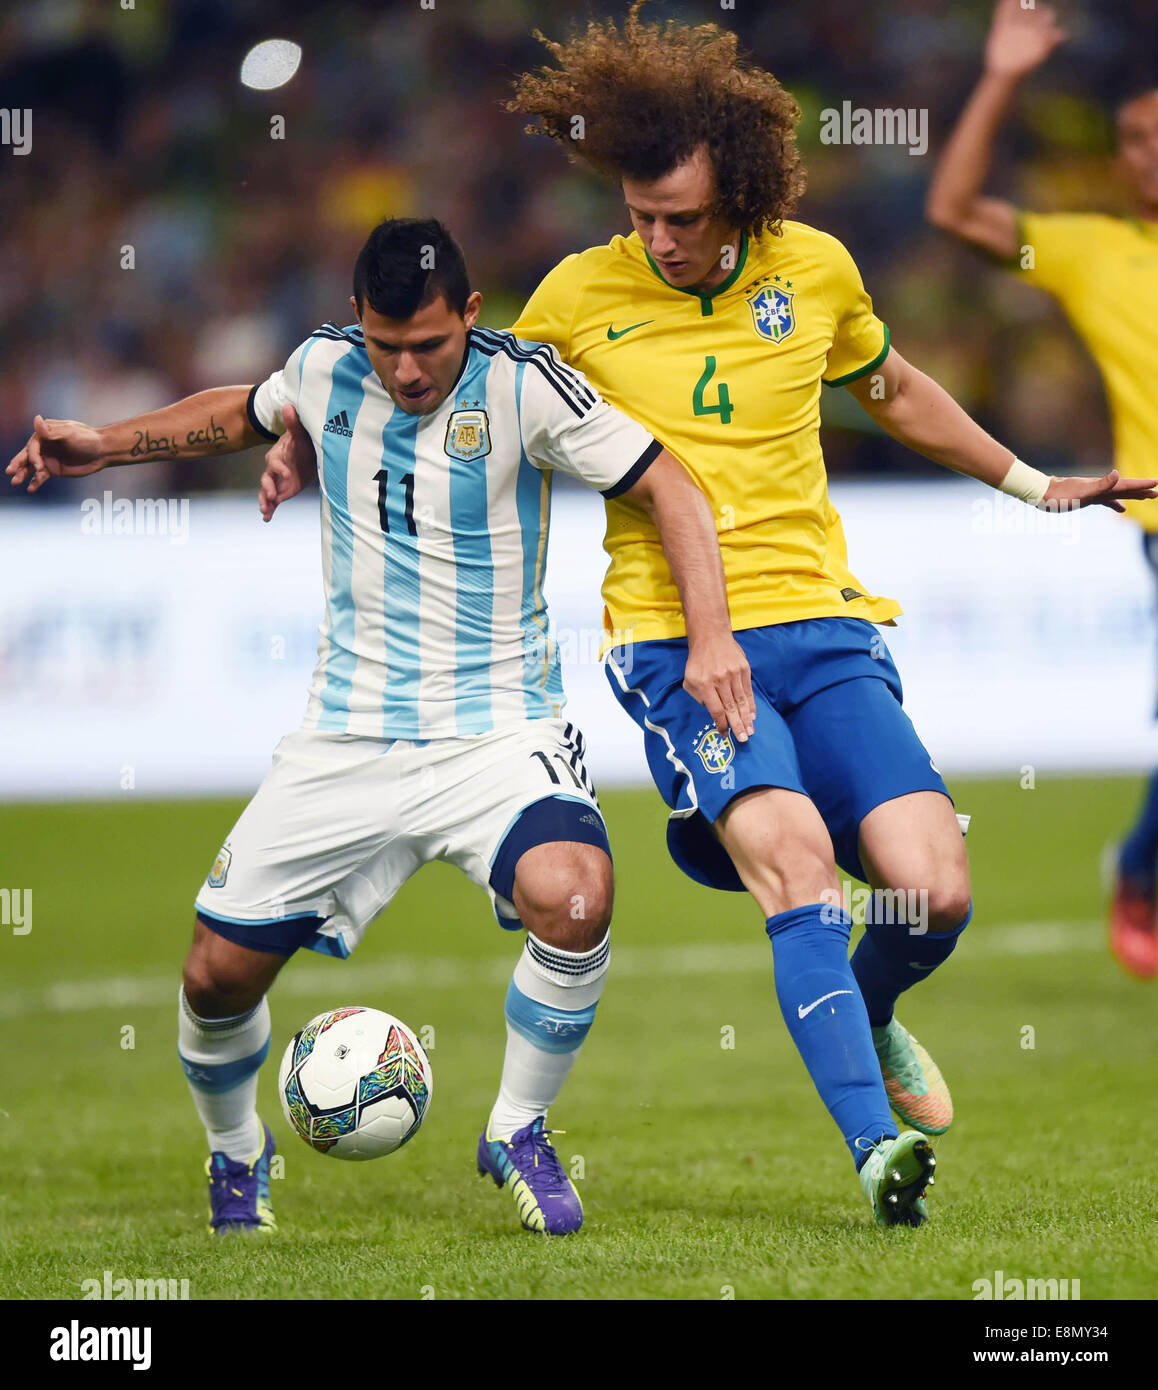 Beijing, China. 11th Oct, 2014. Argentina's Sergio Aguero (L) controls the ball during a friendly match against Brazil in Beijing, capital of China, Oct. 11, 2014. Credit:  Guo Yong/Xinhua/Alamy Live News Stock Photo